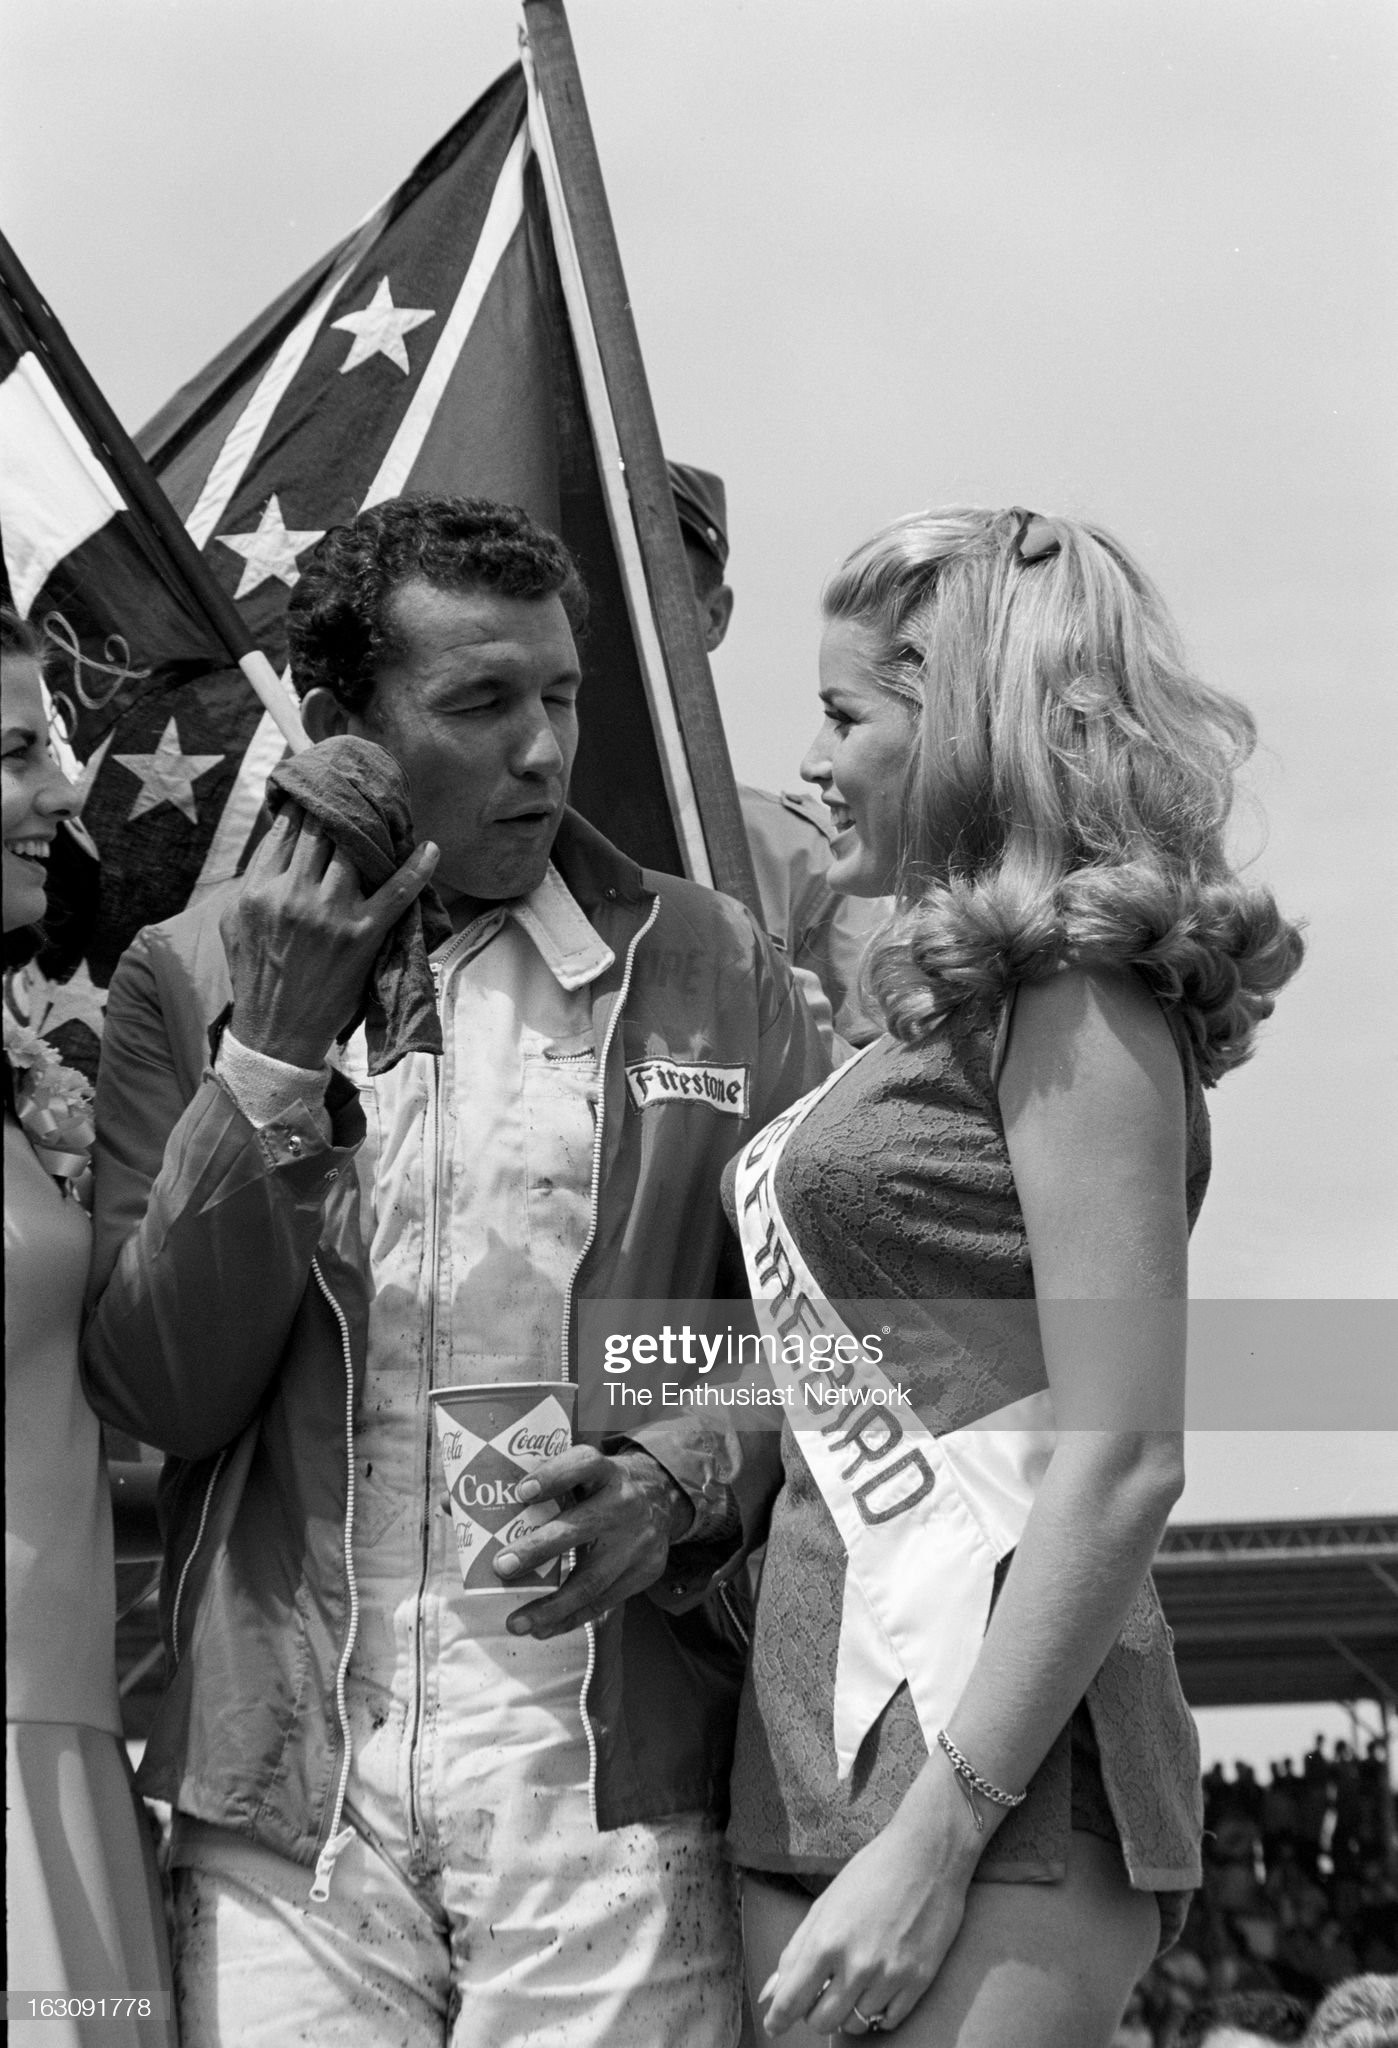 United States, September 06, 1967, Darlington Southern 500. Race winner Richard Petty celebrates his victory with the Southern 500 Race queen (left) and miss Firebird. 